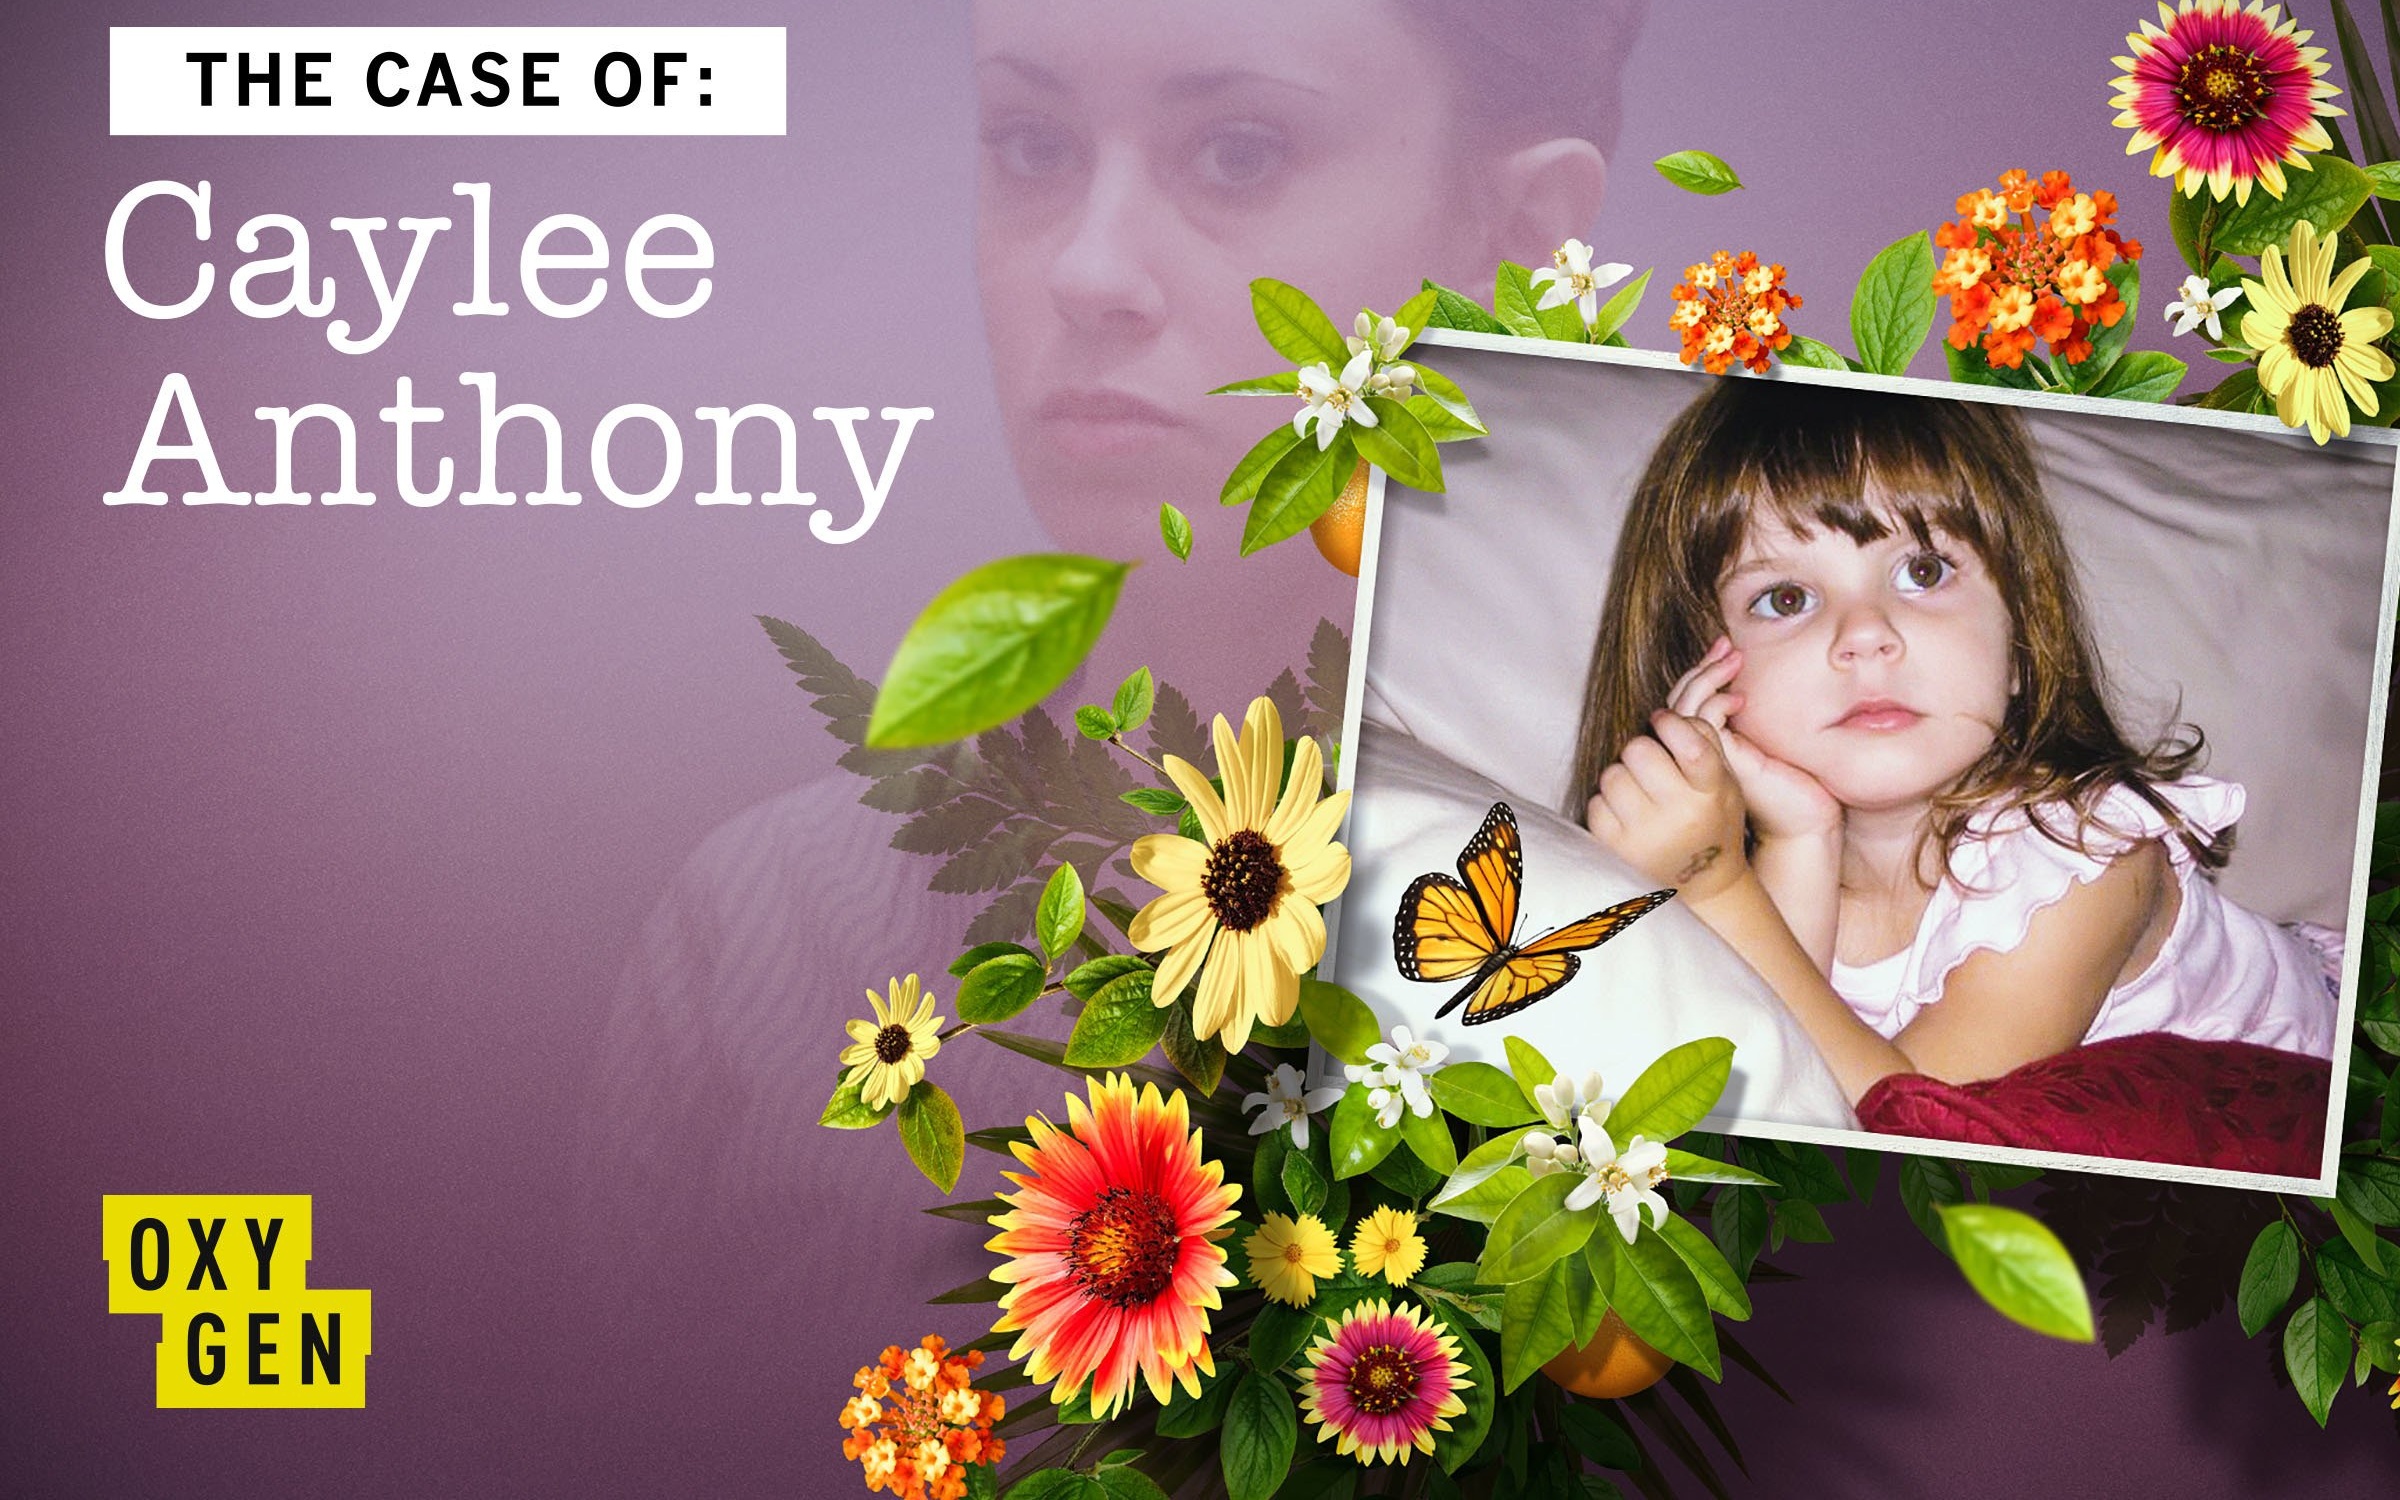 The Case of Caylee Anthony